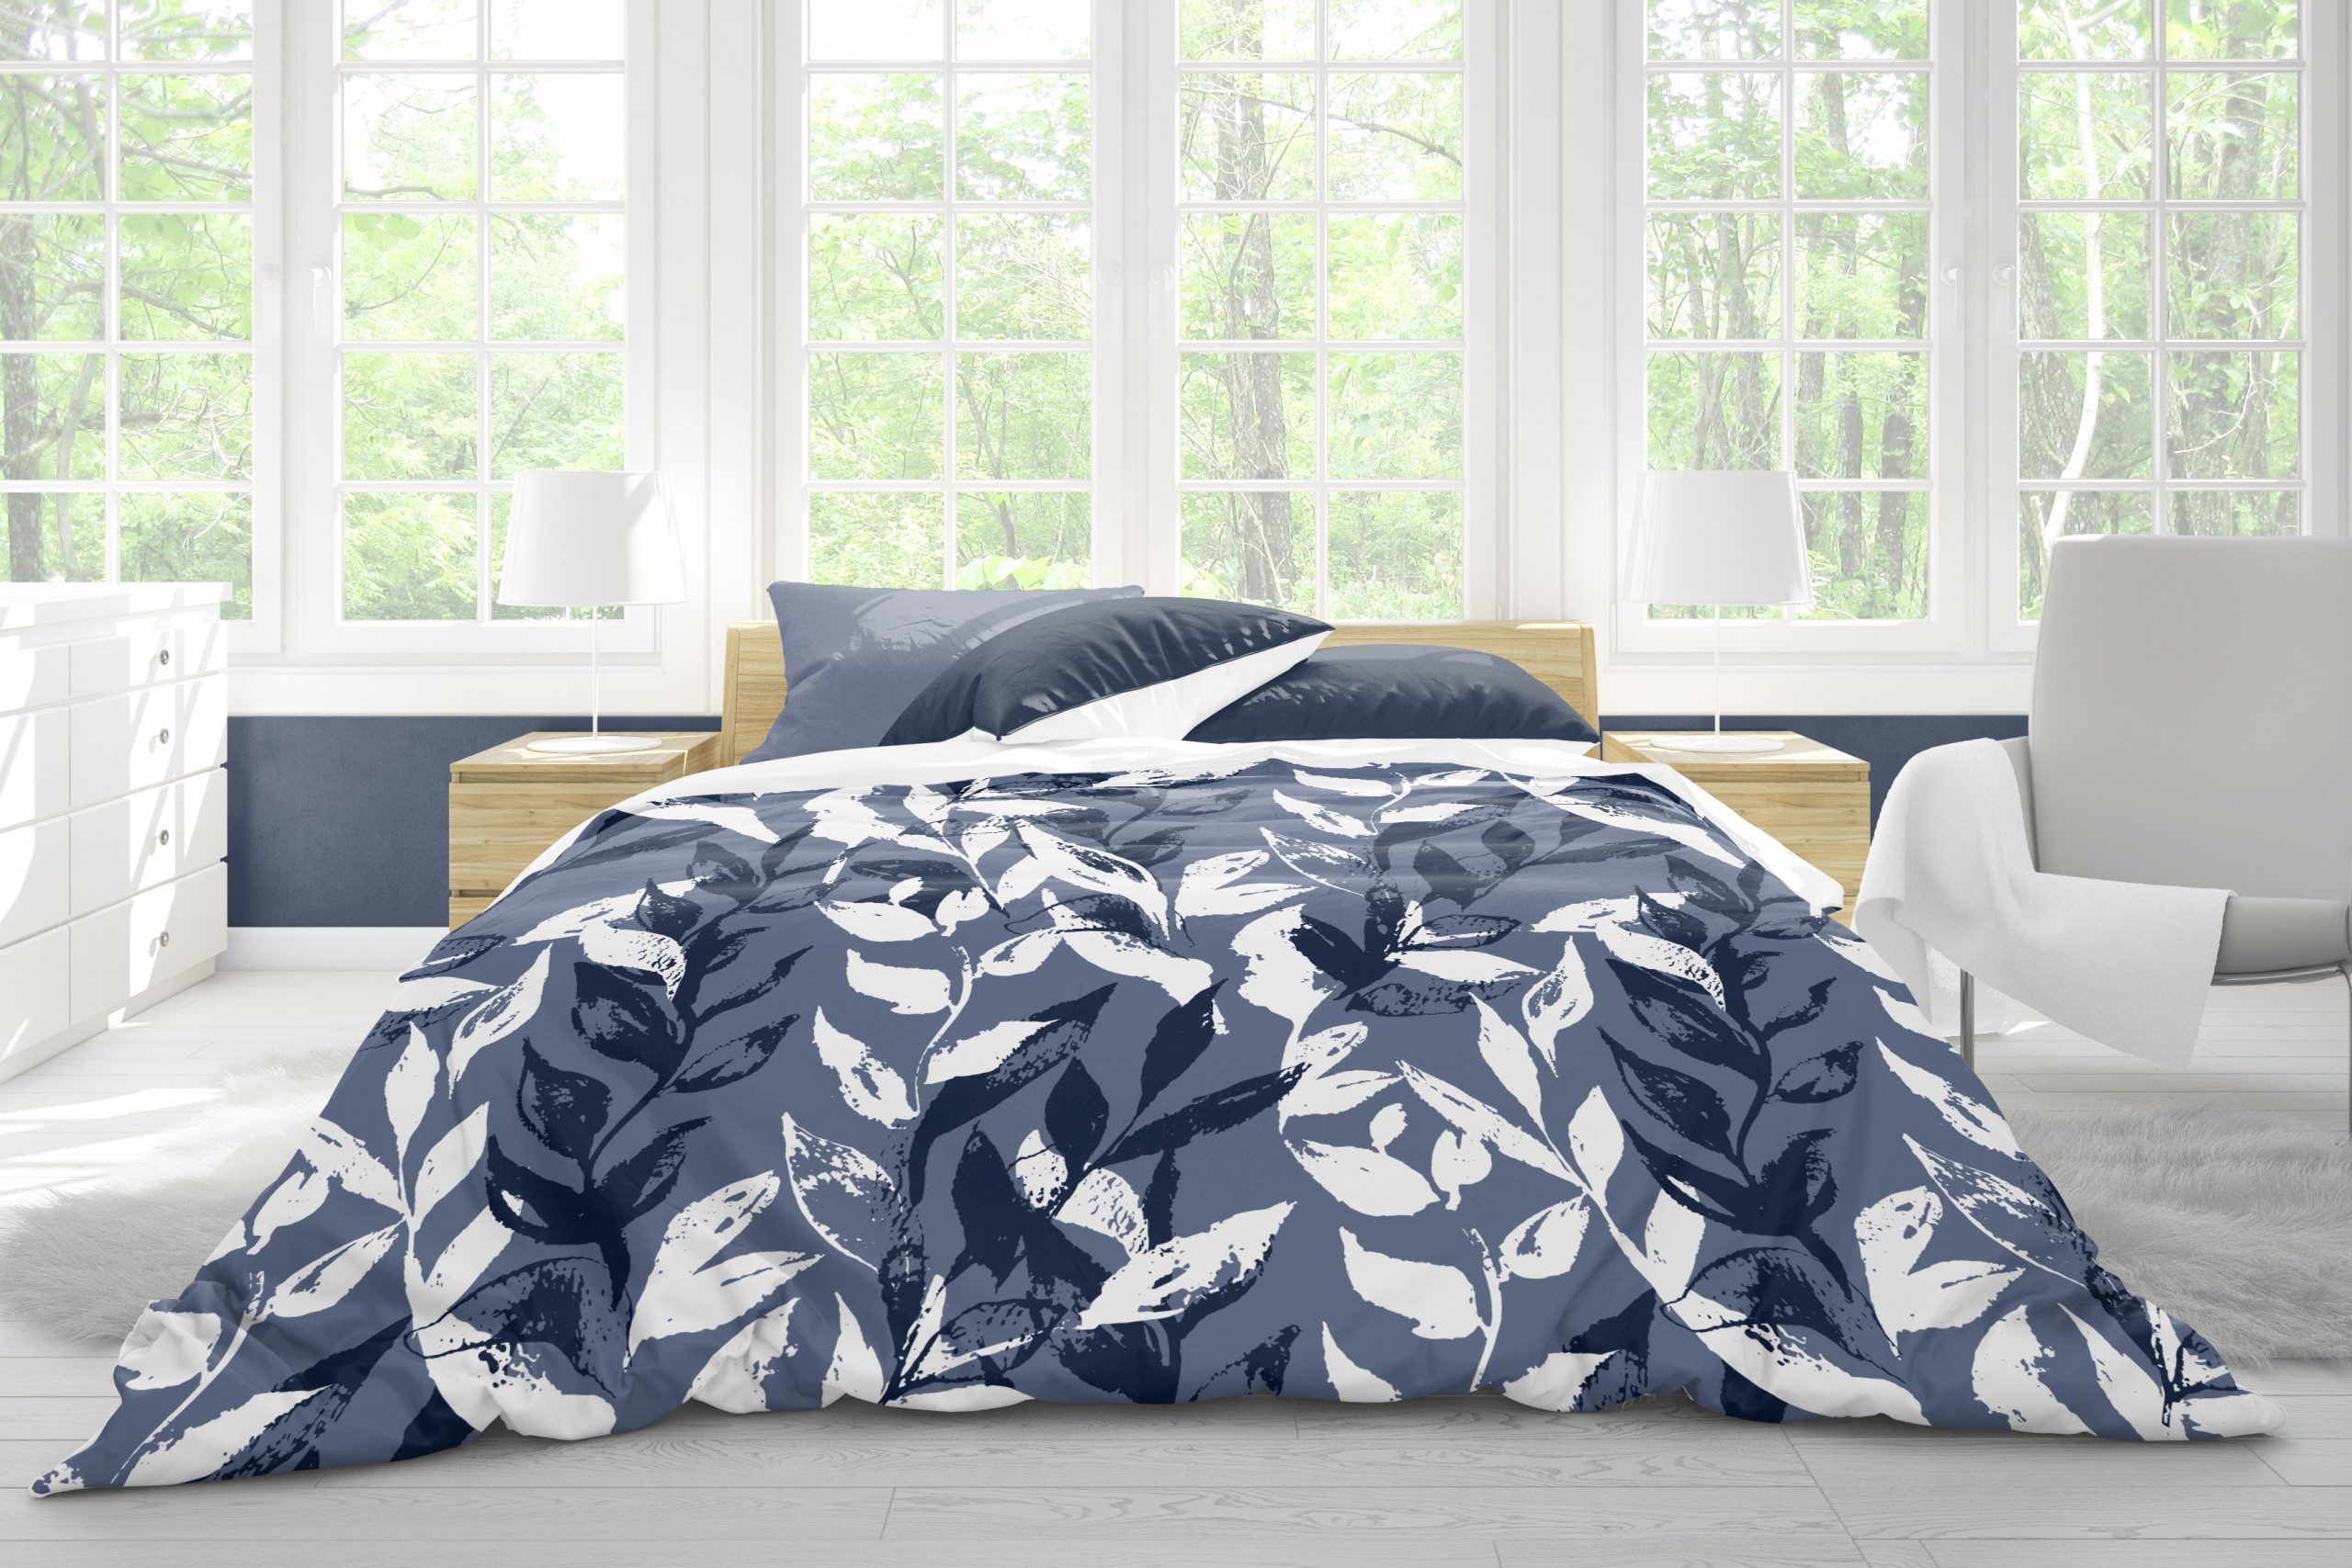 Read more about the article Choosing the Perfect Duvet Cover: A Guide to Colors, Patterns, and Materials